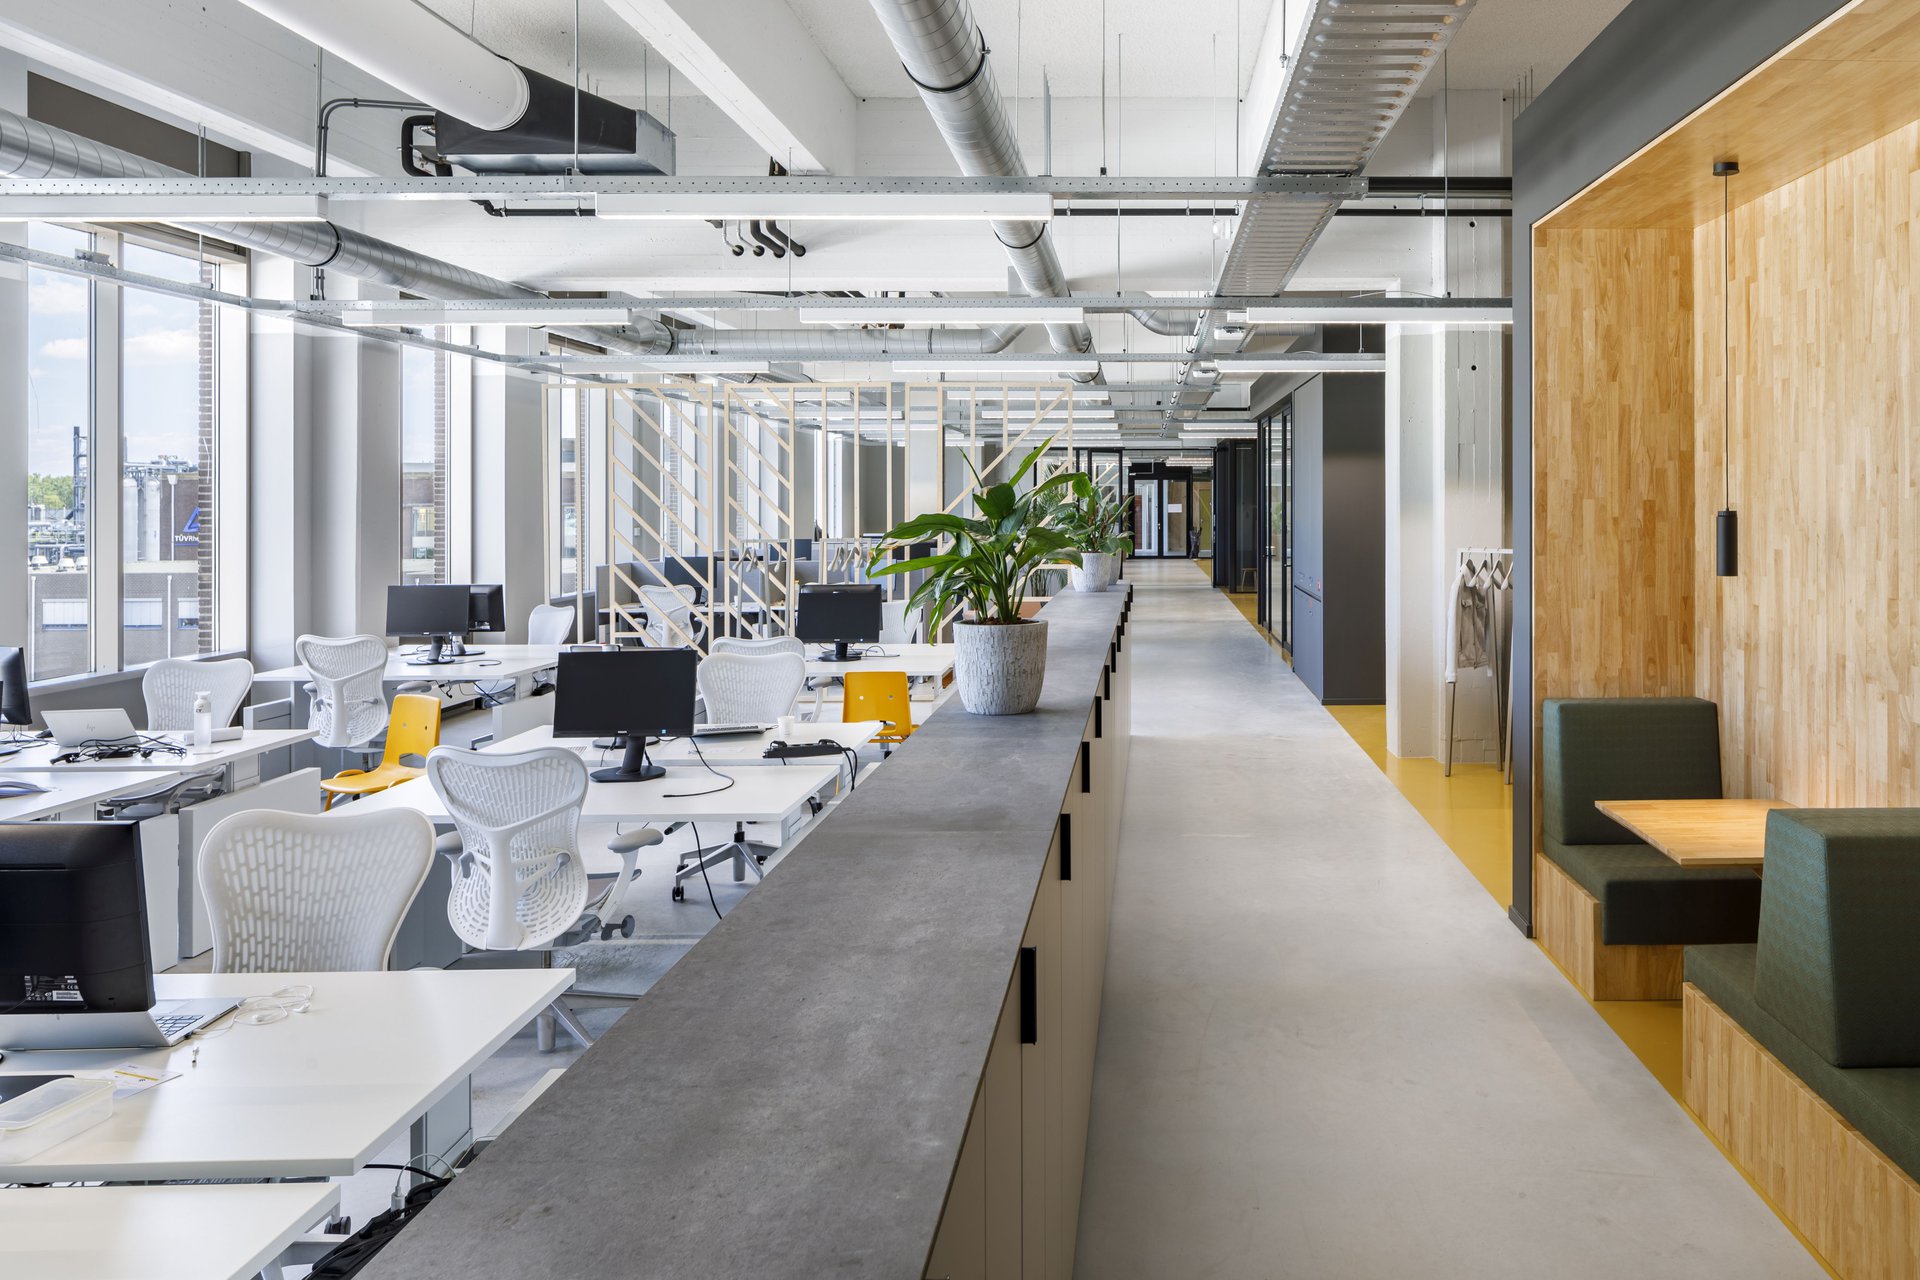 Architecture. With its relocation to the cleantech campus IPKW, global accountancy and advisory firm EY immersed its Arnhem office amid a forward thin